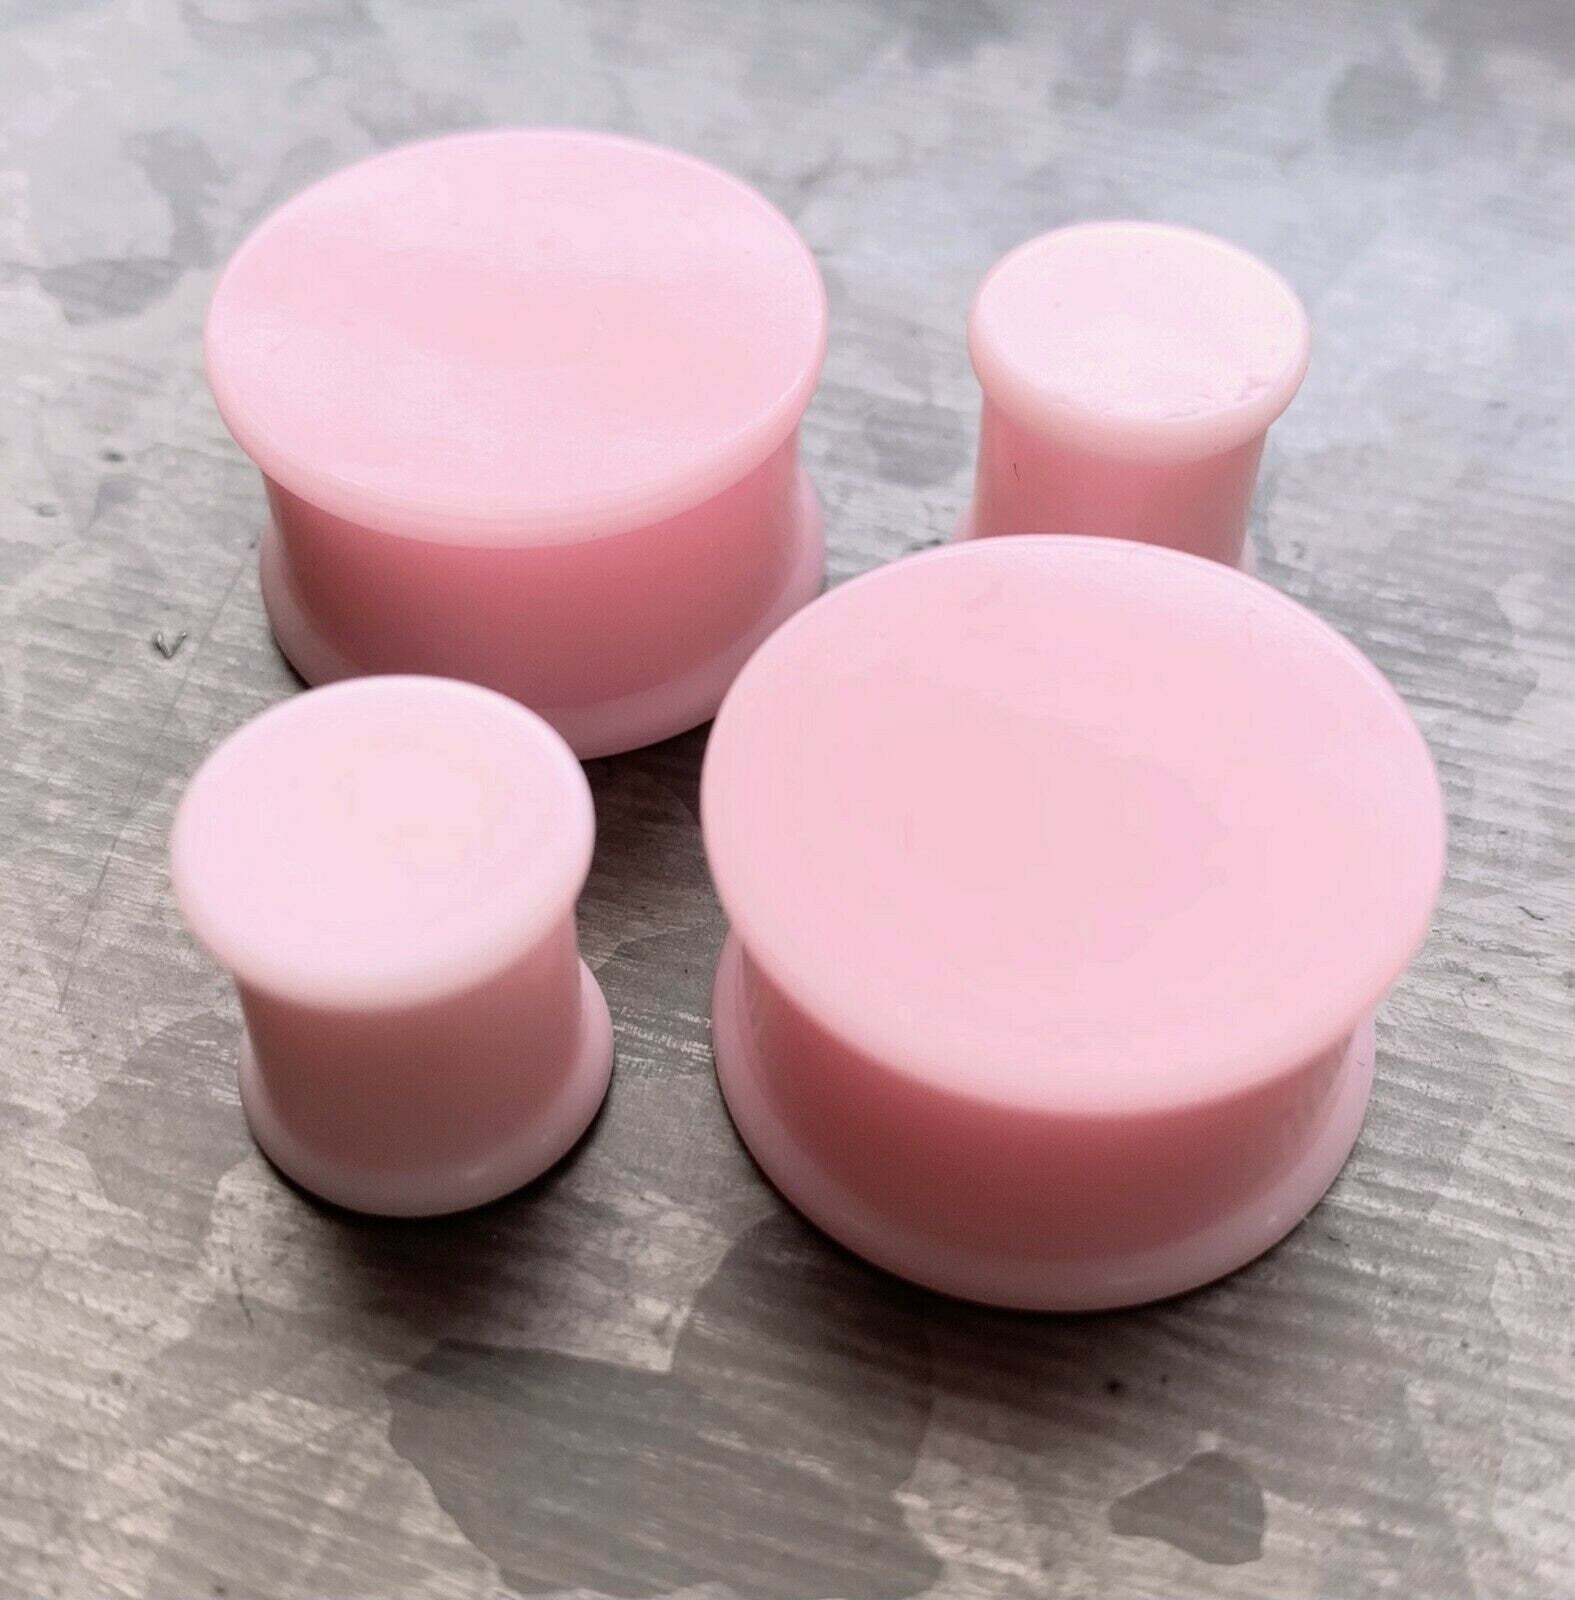 PAIR of Stunning Baby Pink Solid Silicone Double Flare Plugs - Gauges 2g (6mm) up to 51mm available!